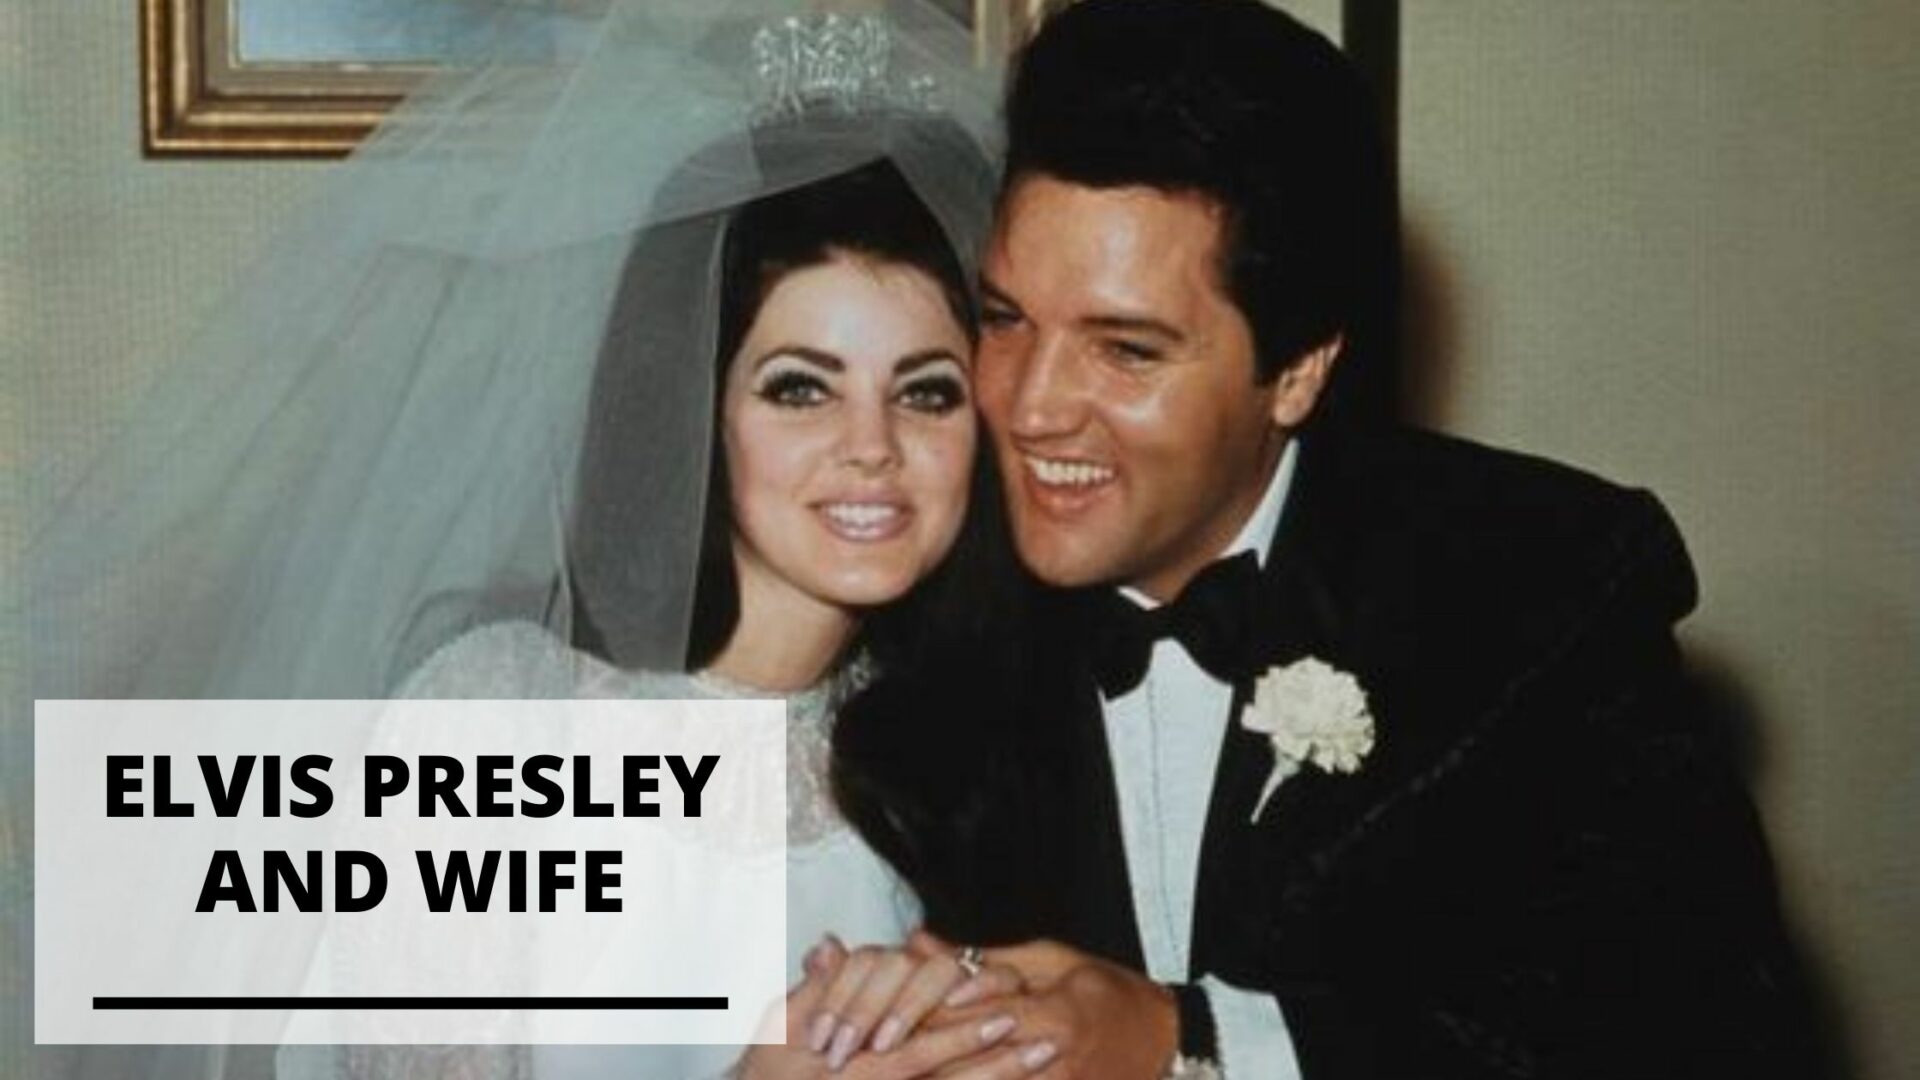 You are currently viewing The Wife of Elvis Presley Before His Death